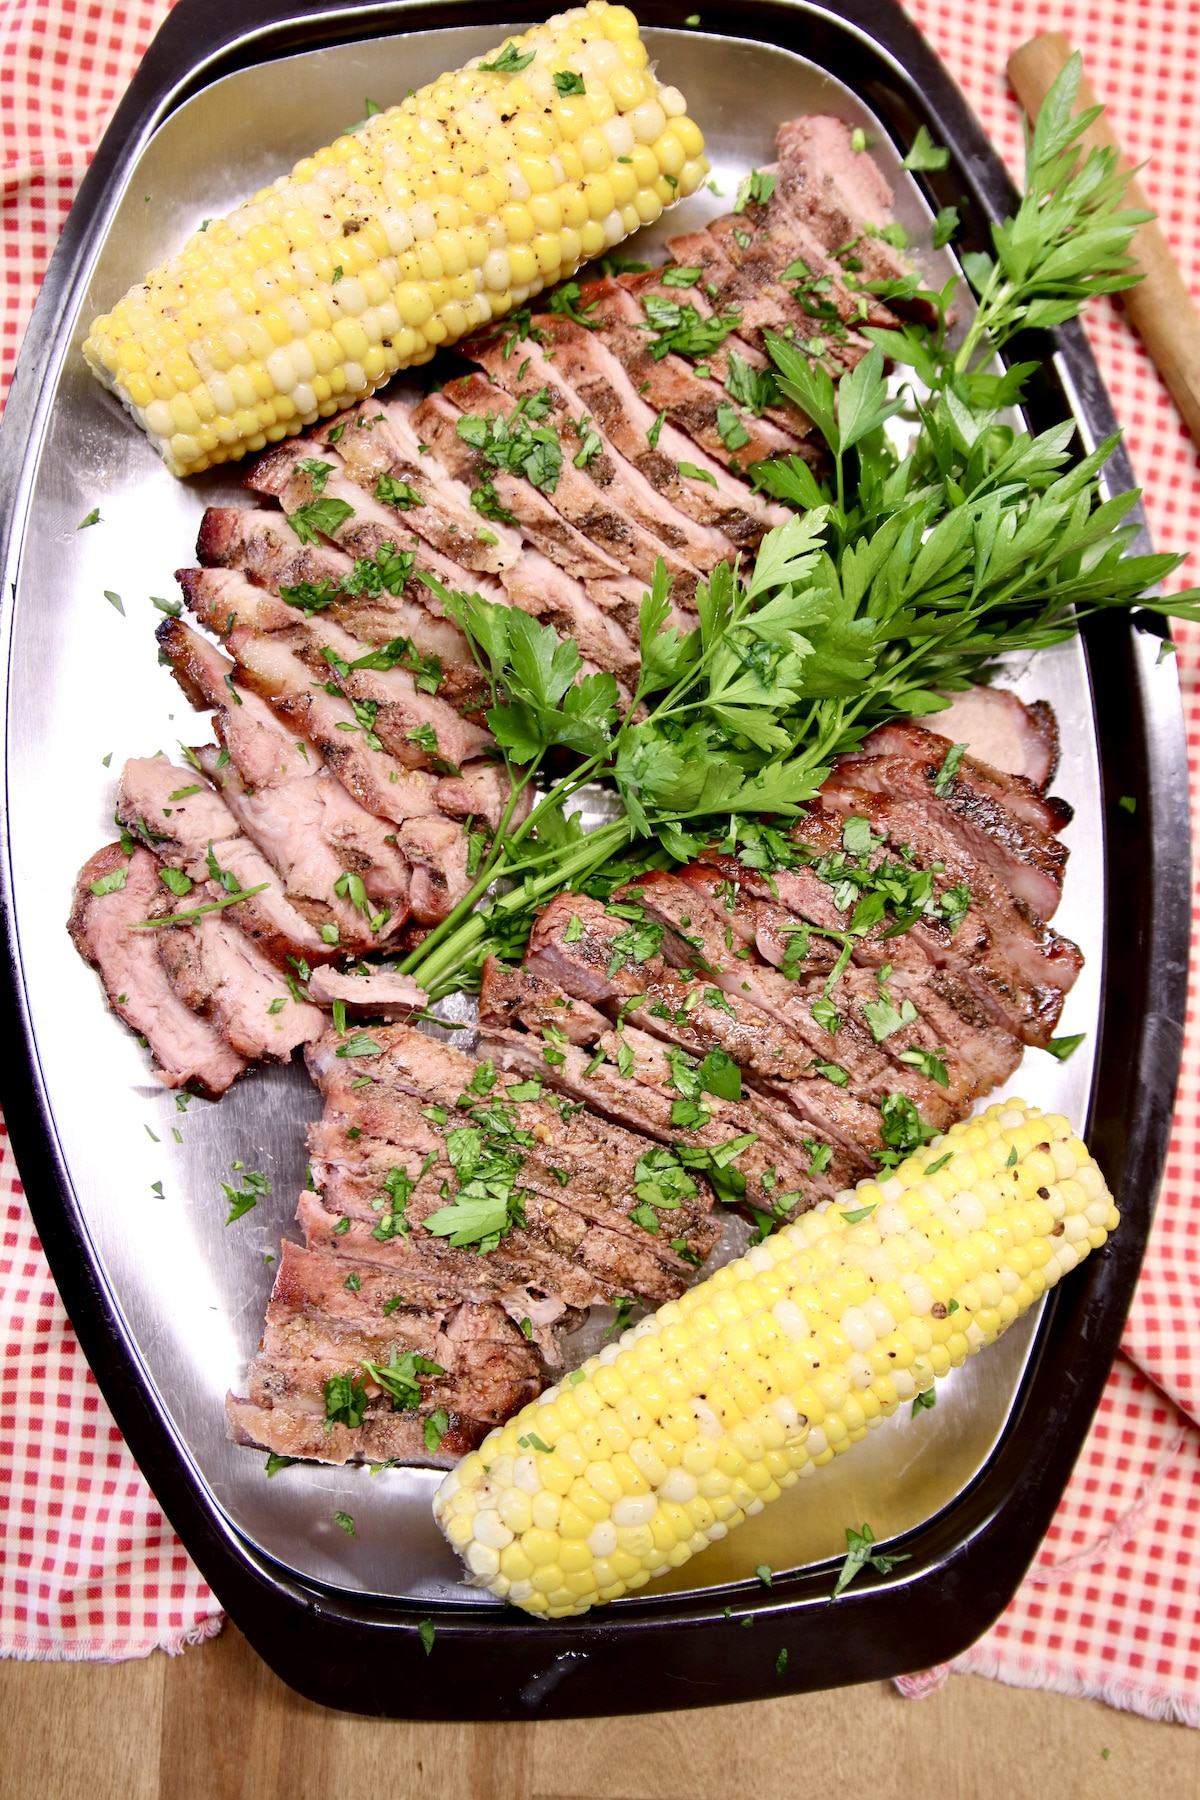 Platter of grilled pork steaks with 2 corn cobs.